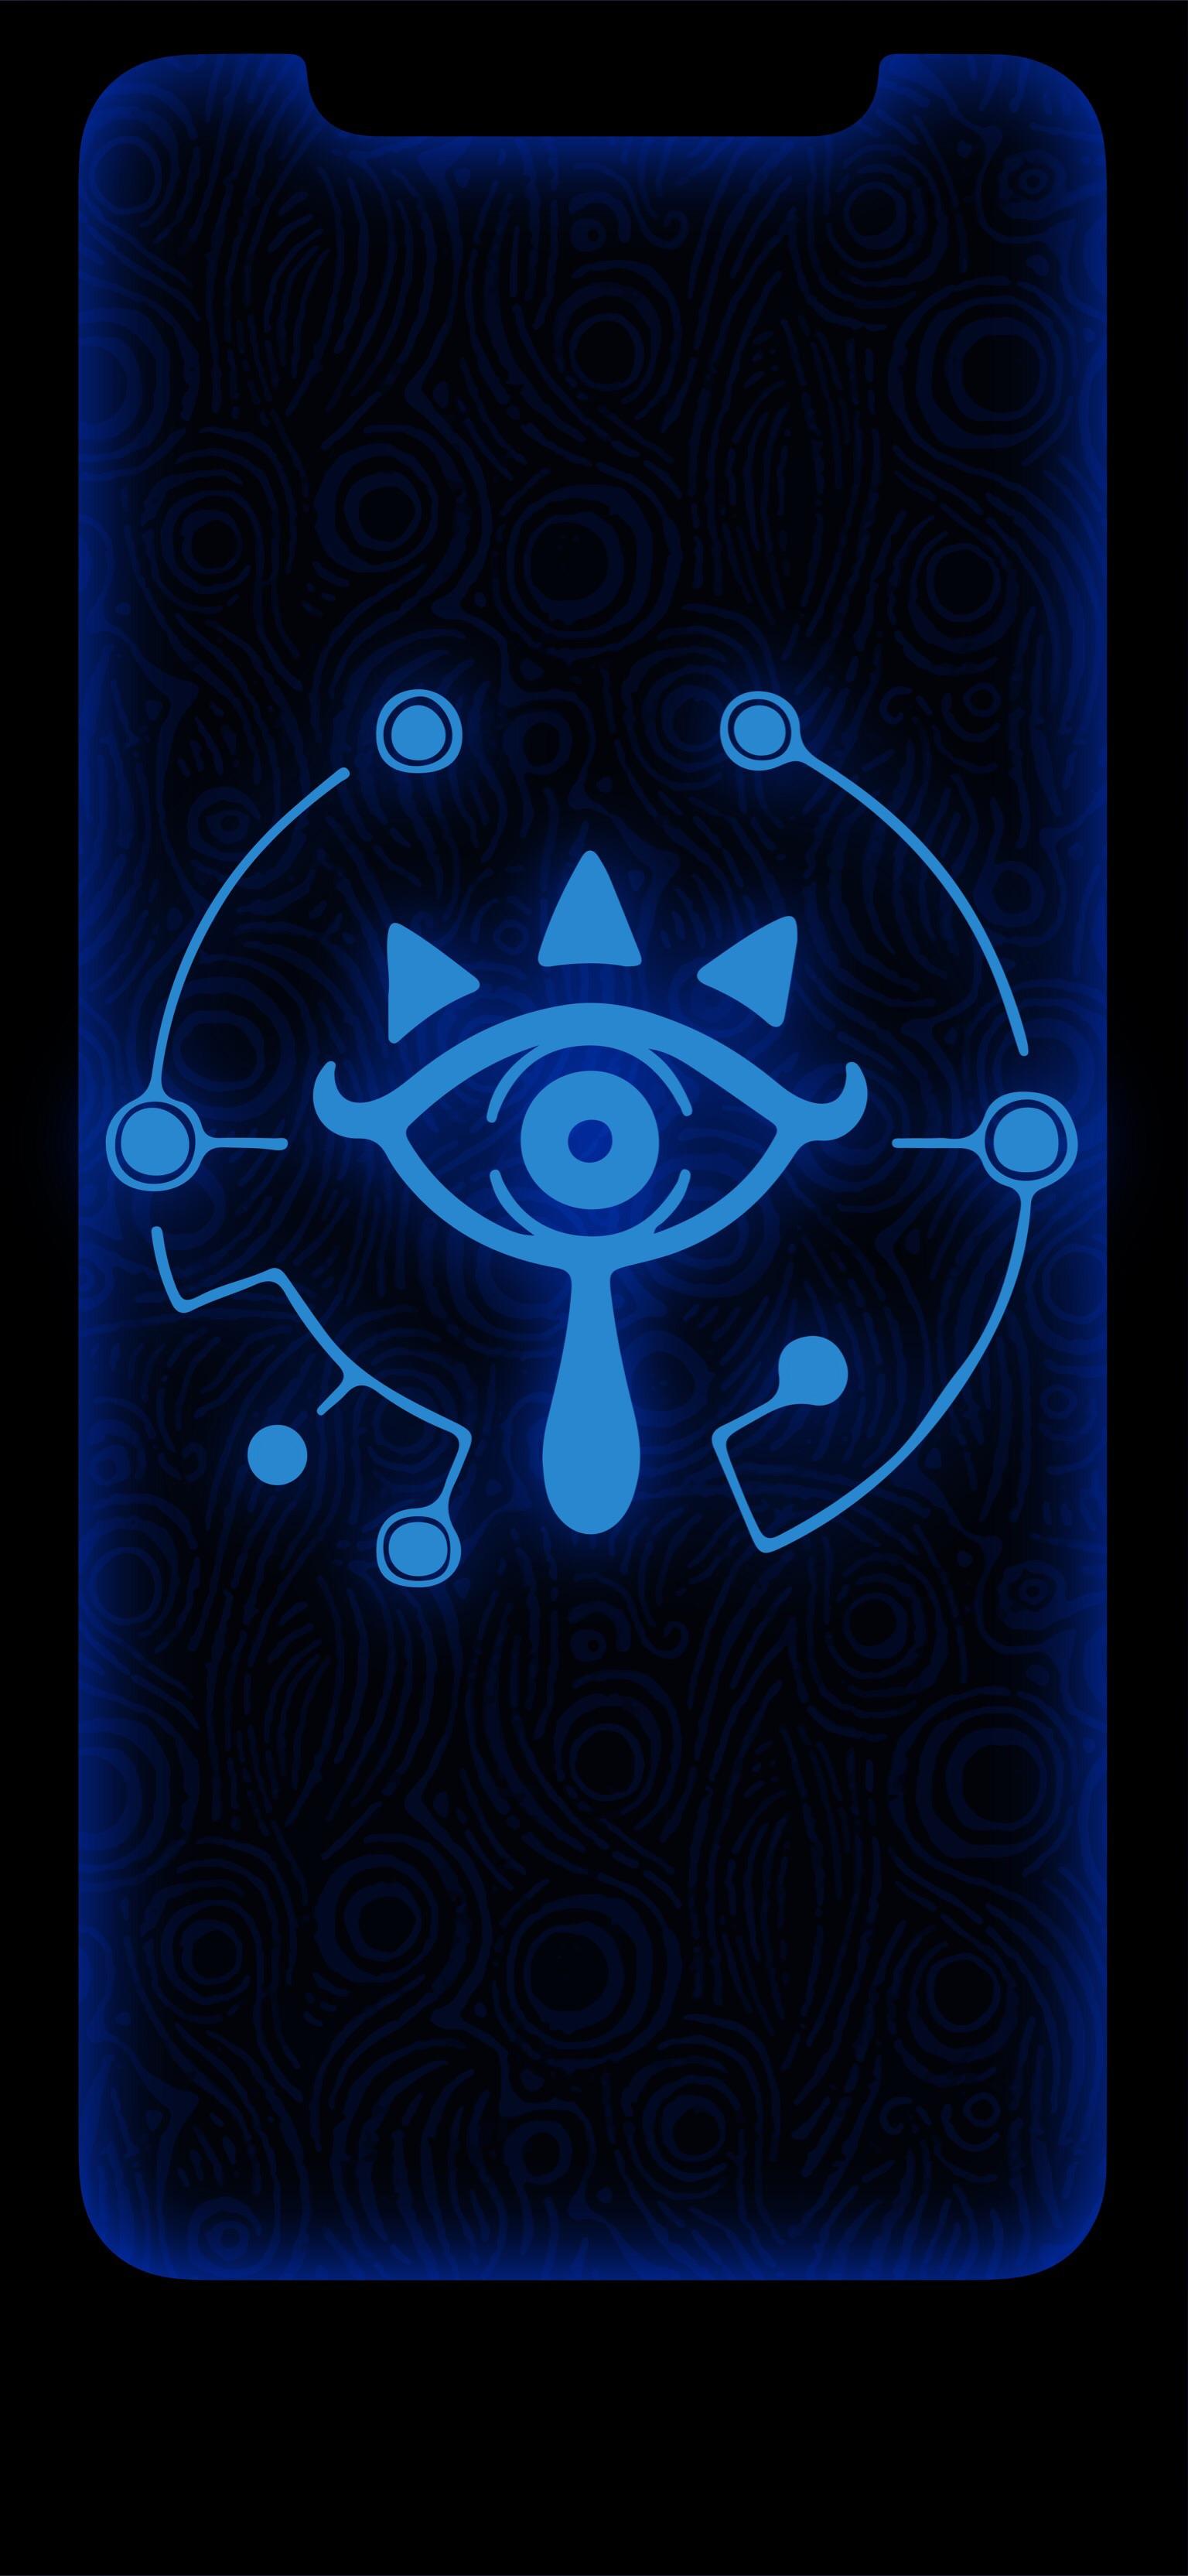  download Made a sheikah slate wallpaper for iPhone X Breath 1536x3330